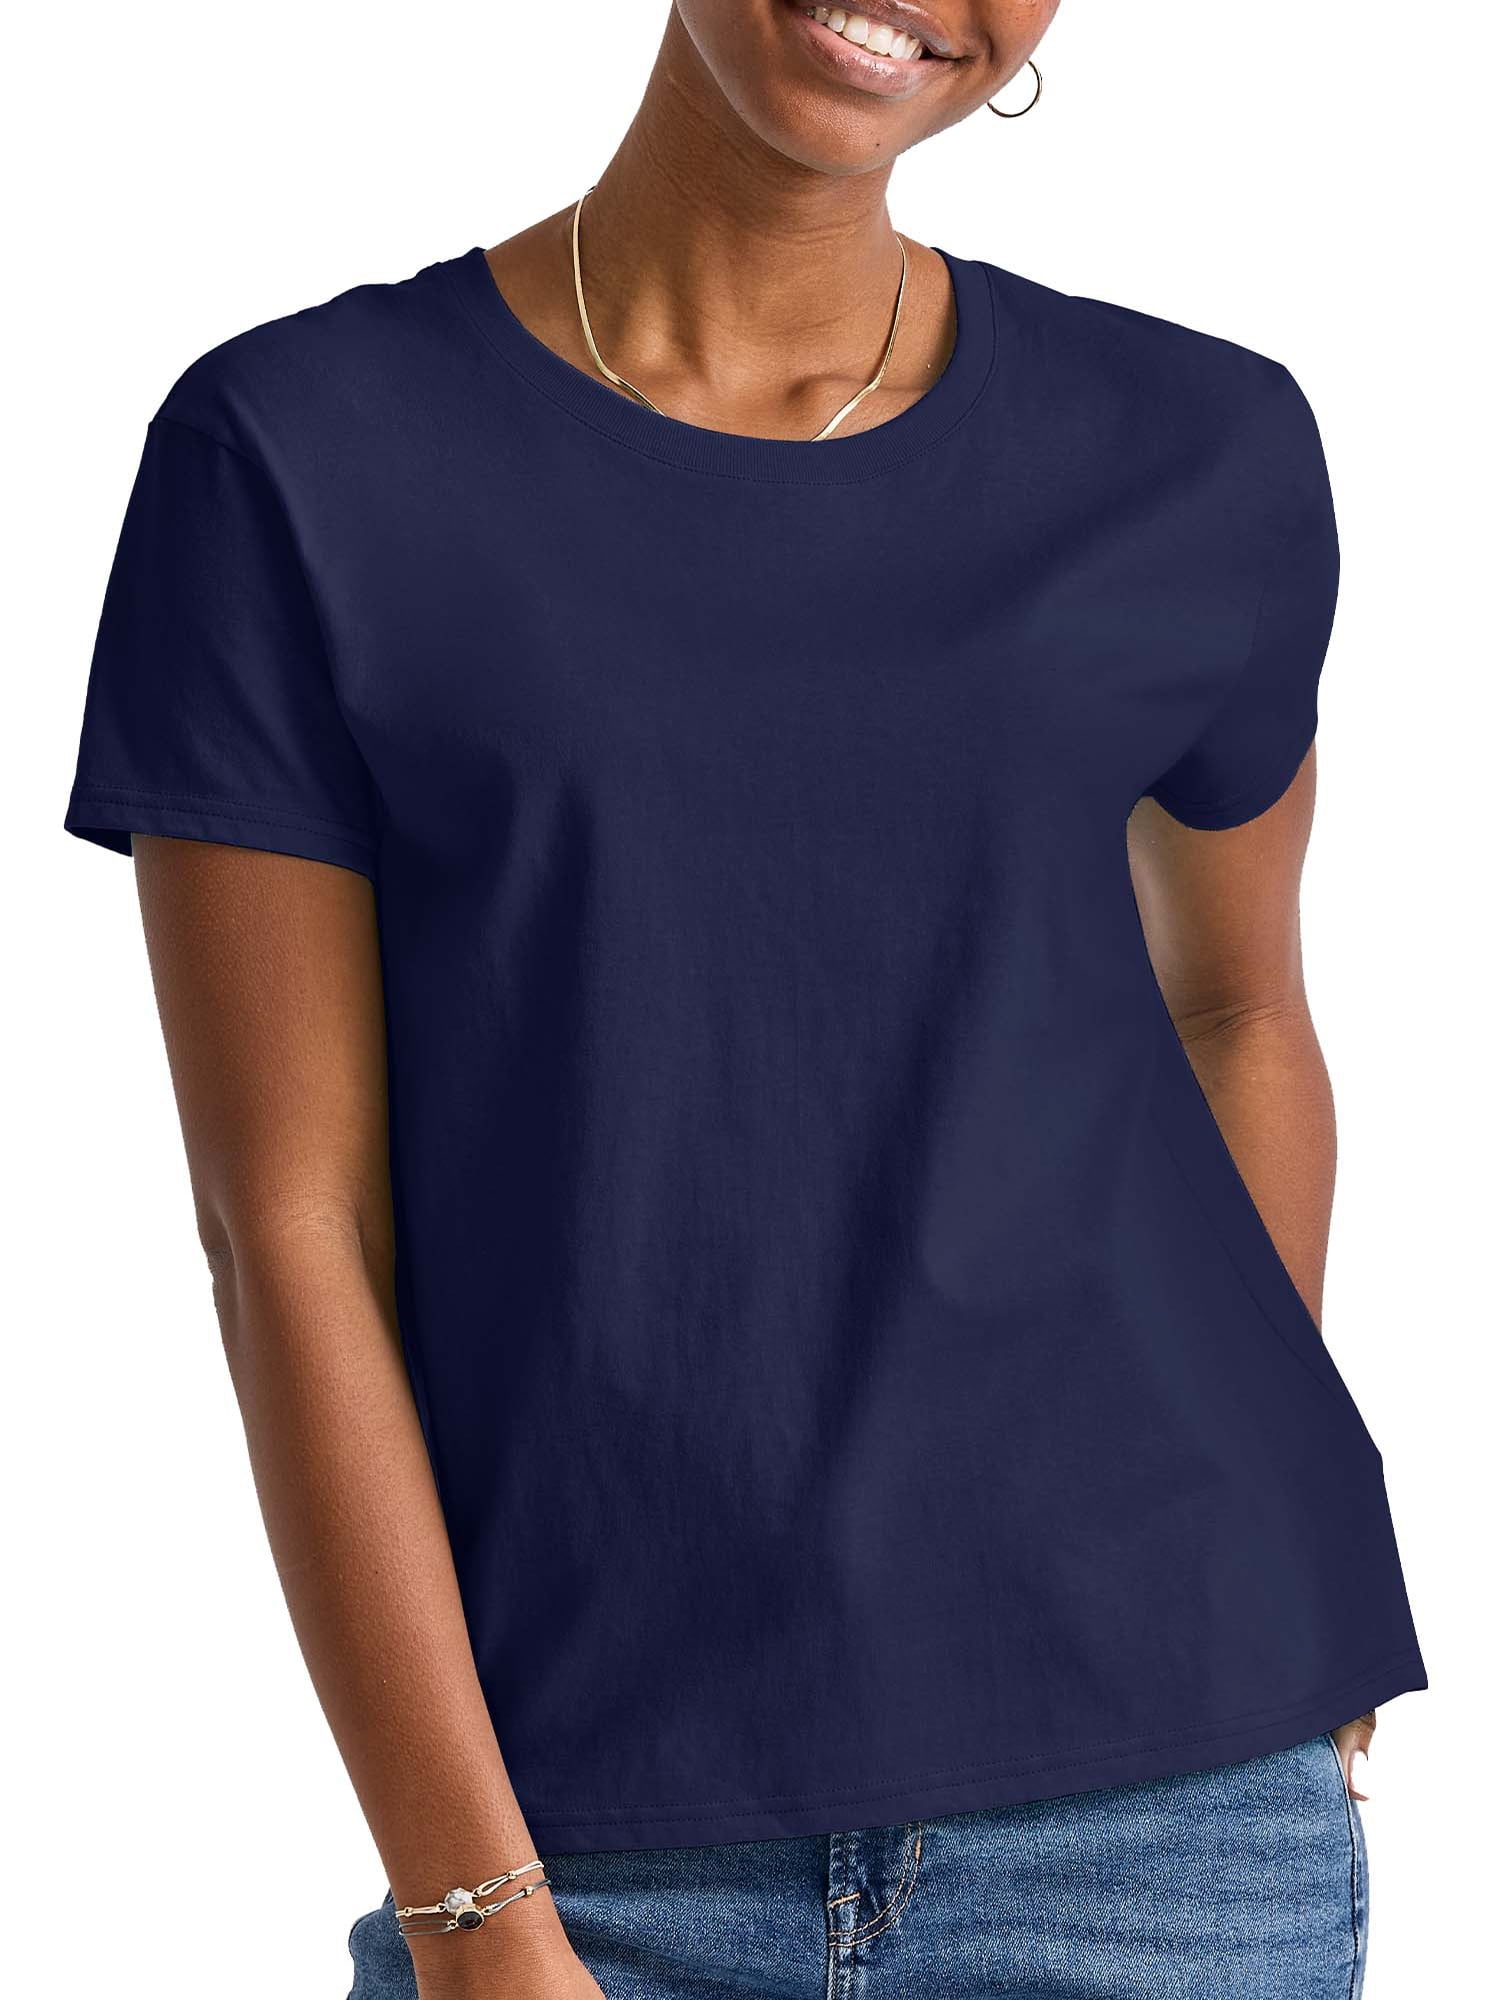 Hanes Essentials Women's T-Shirt, 100% Cotton Relaxed-Fit Tee 